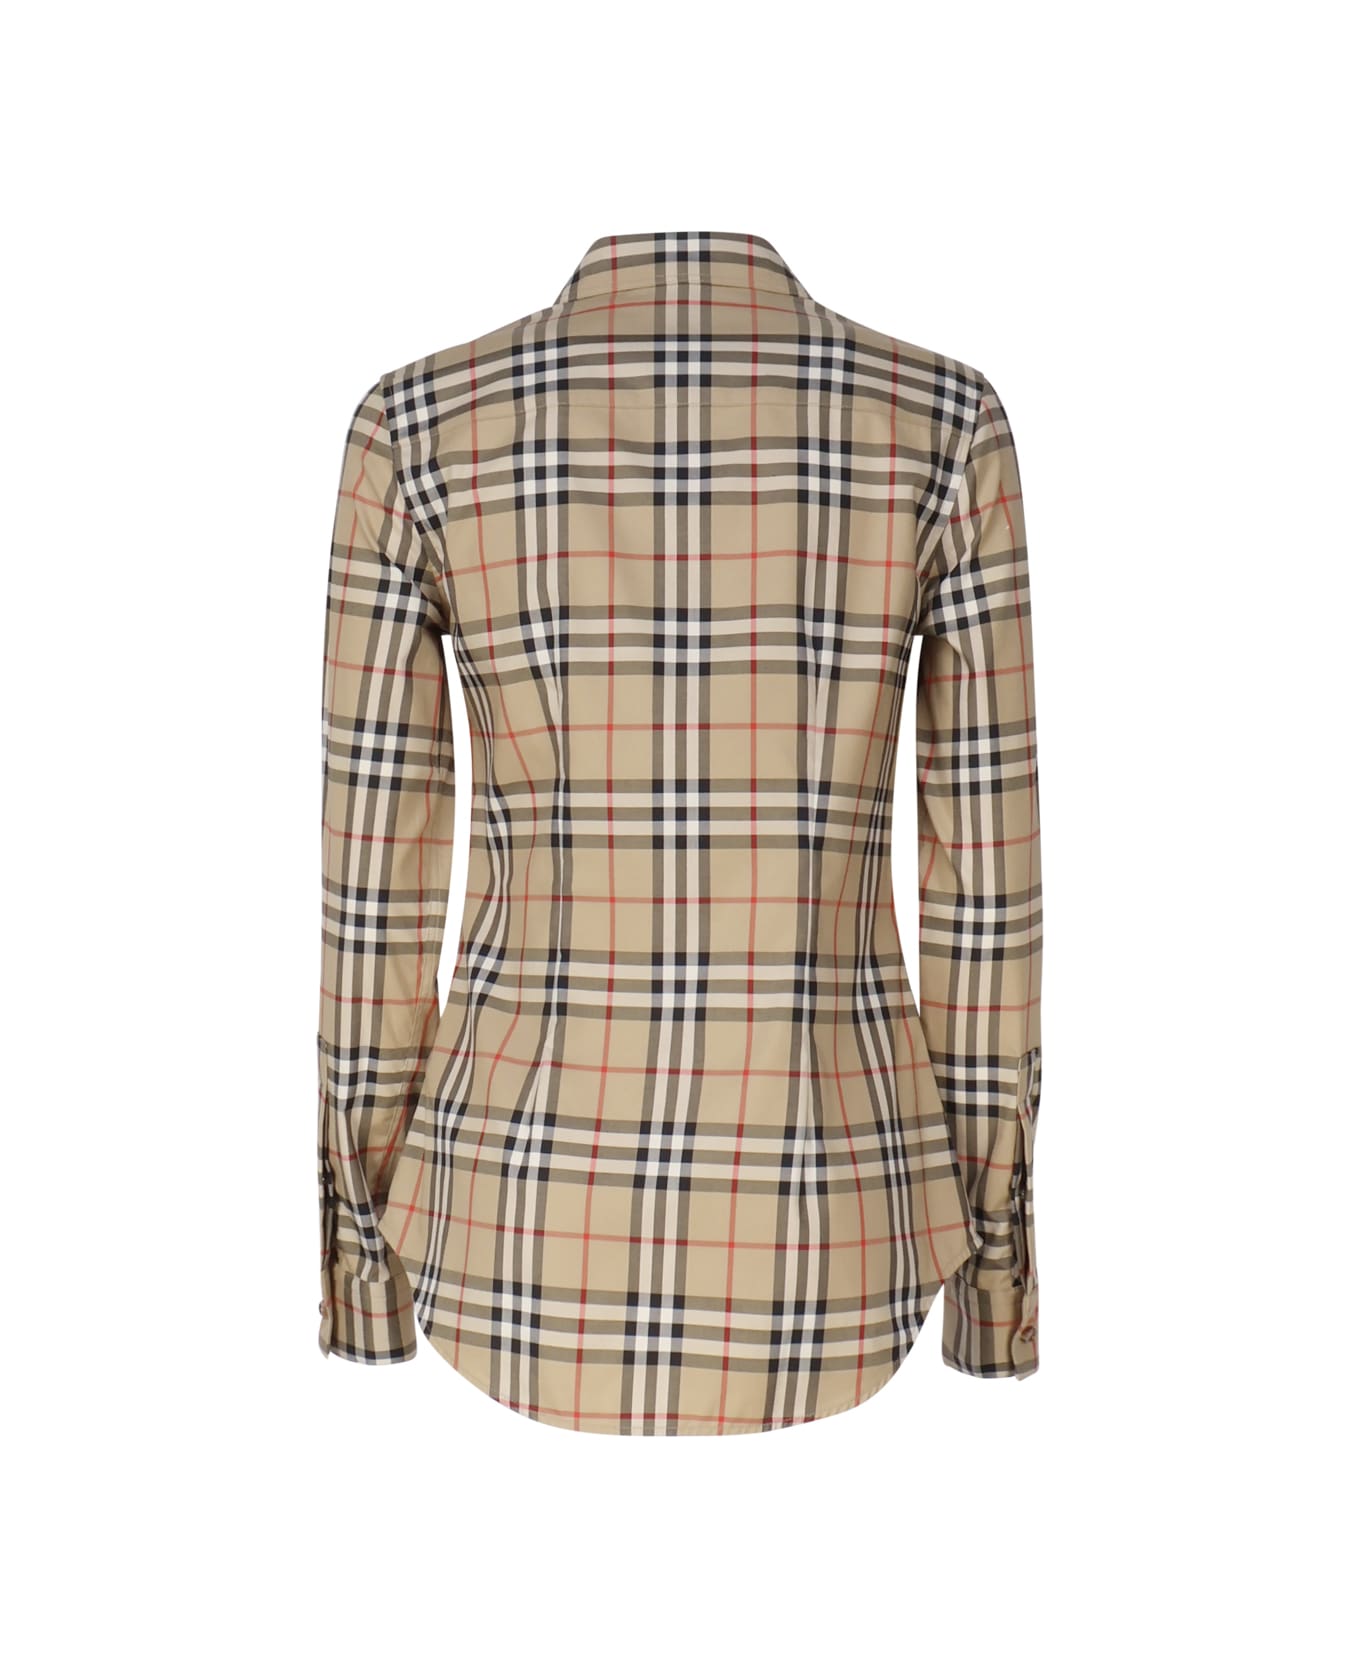 Burberry Shirt With Vintage Check Pattern - Beige